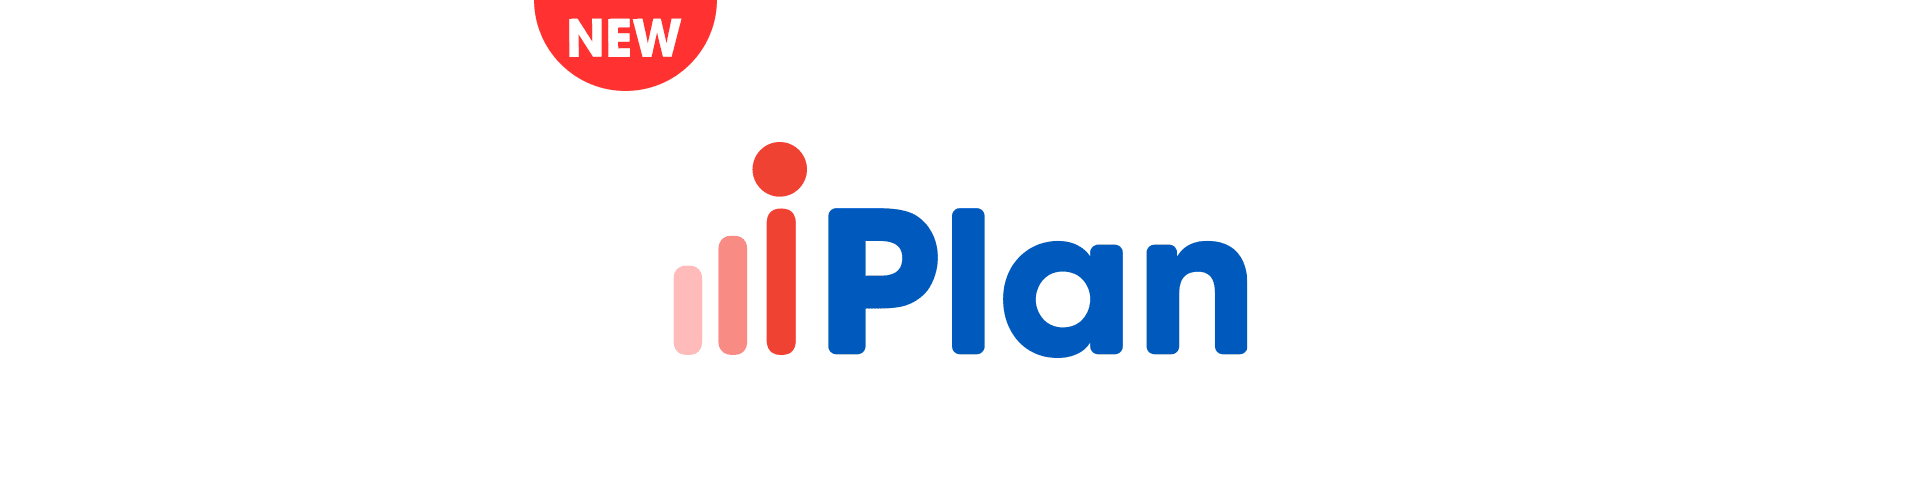 New iPlan packages